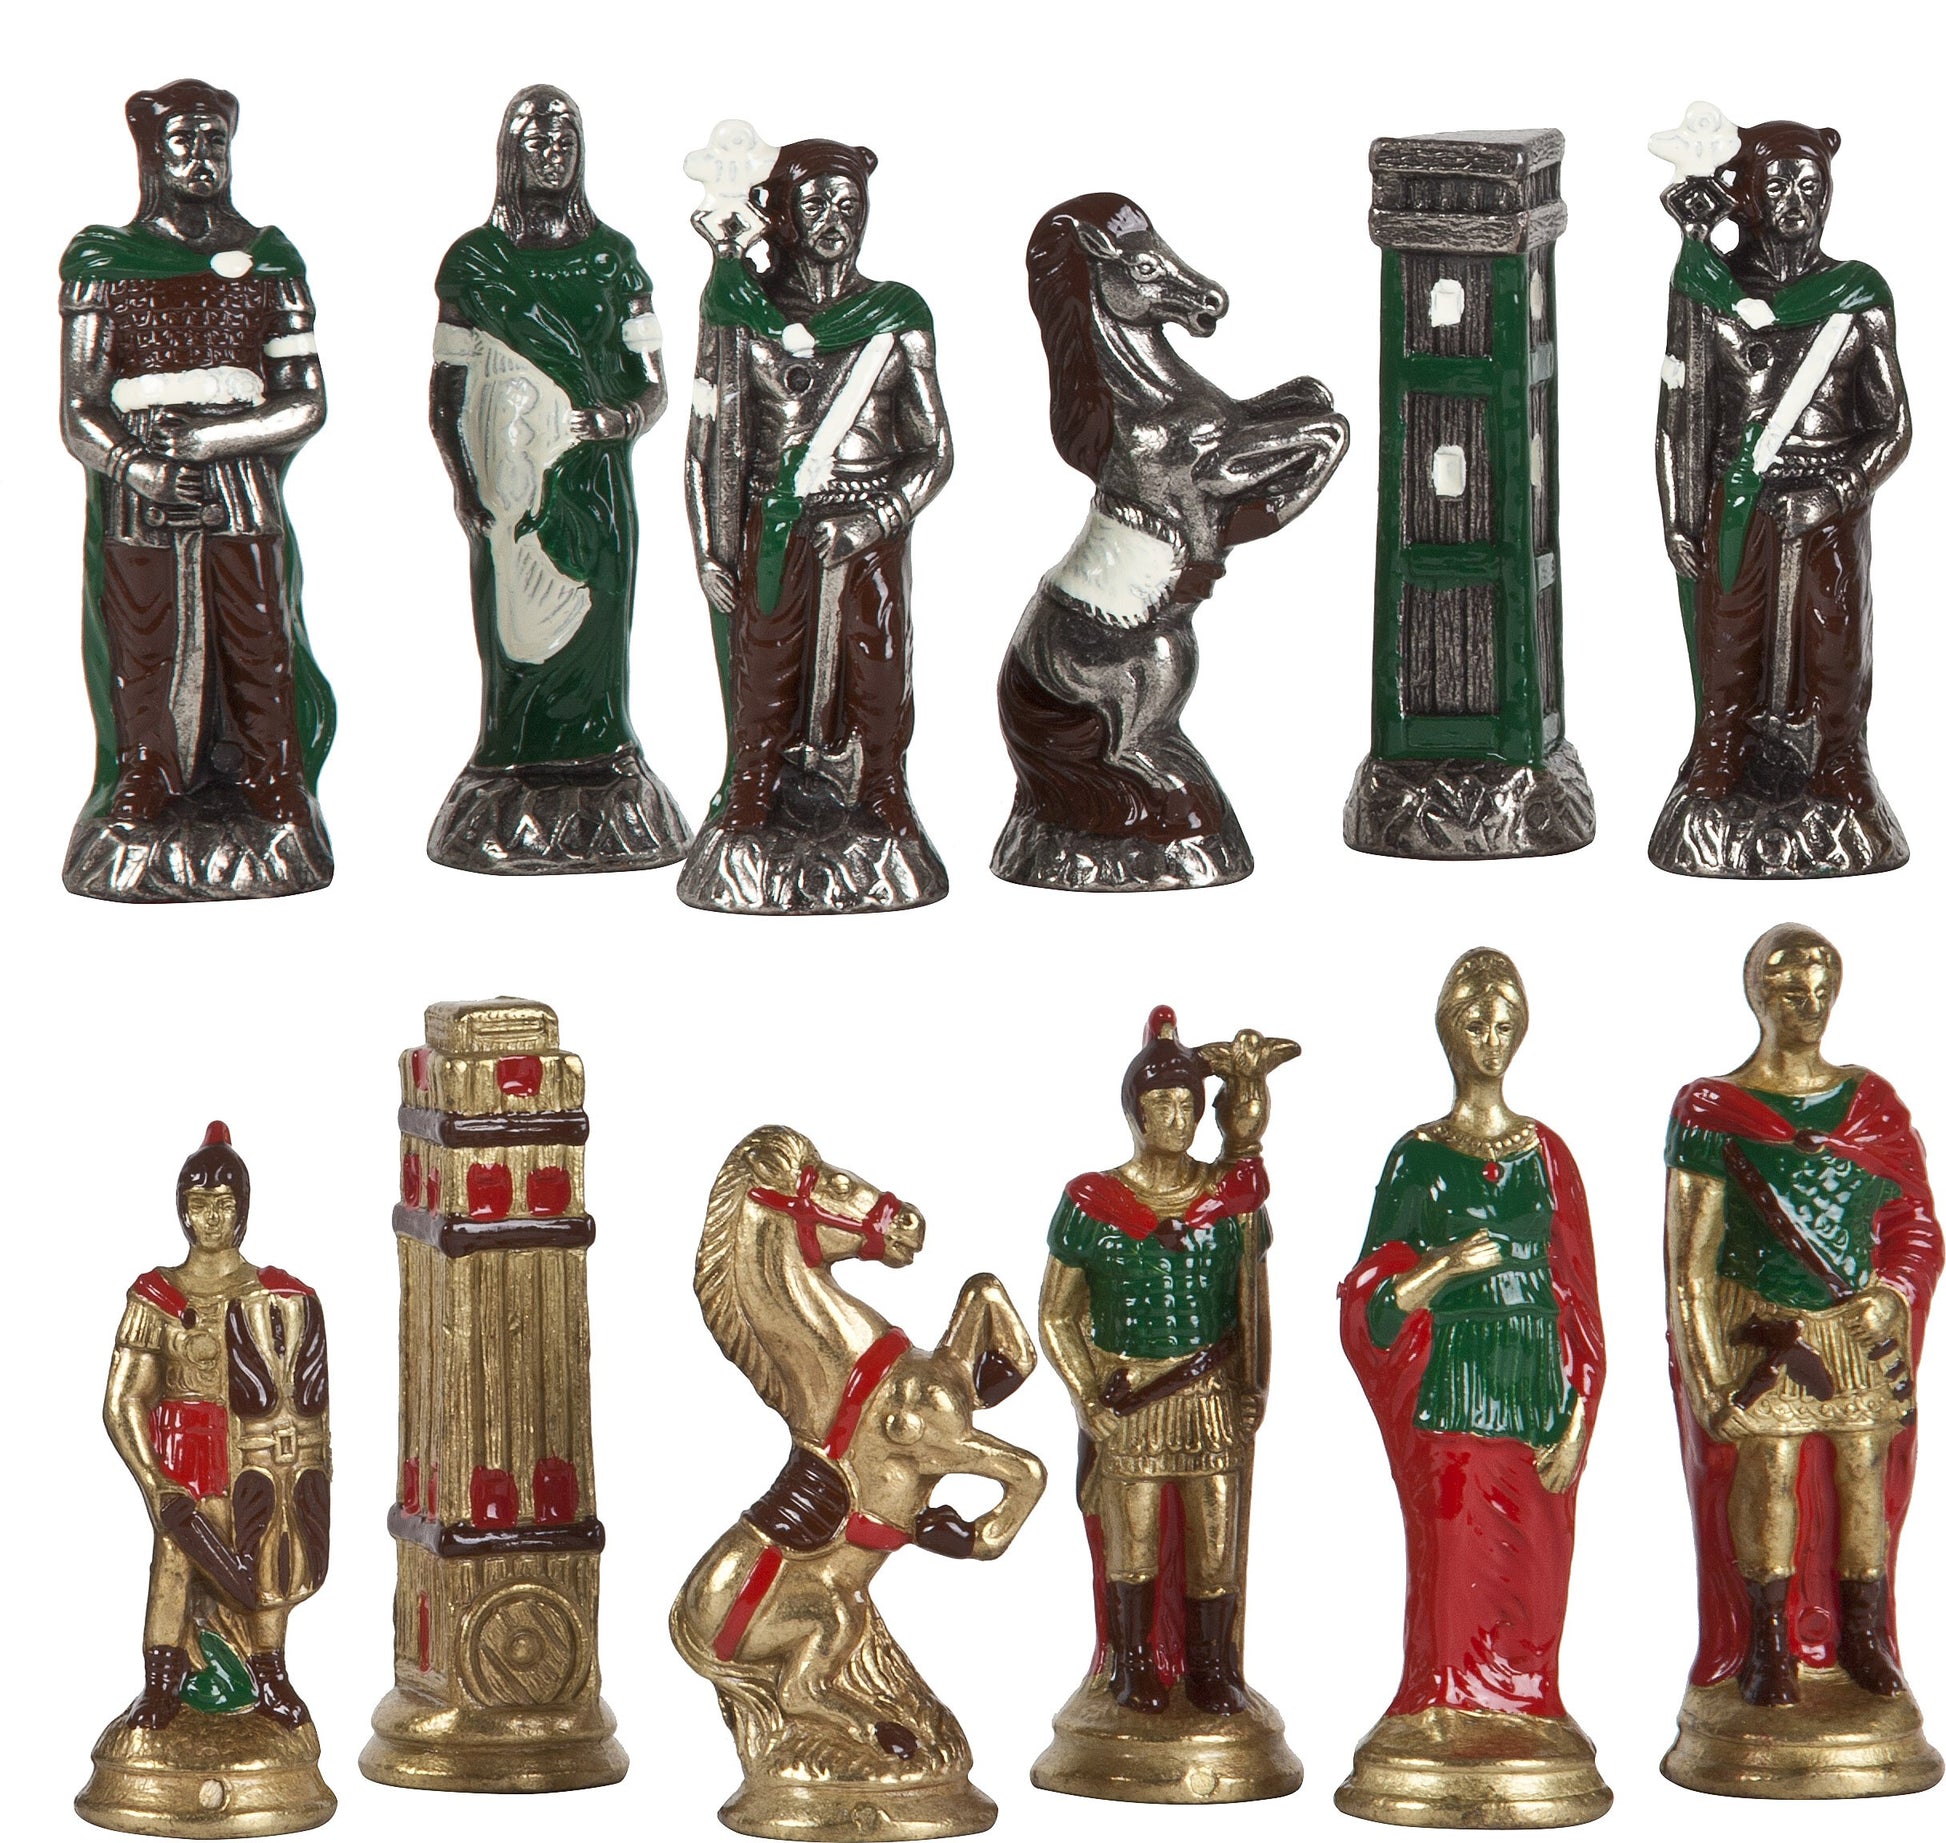 Painted Silver-plated Brass Romans vs Barbarians Themed Chessmen